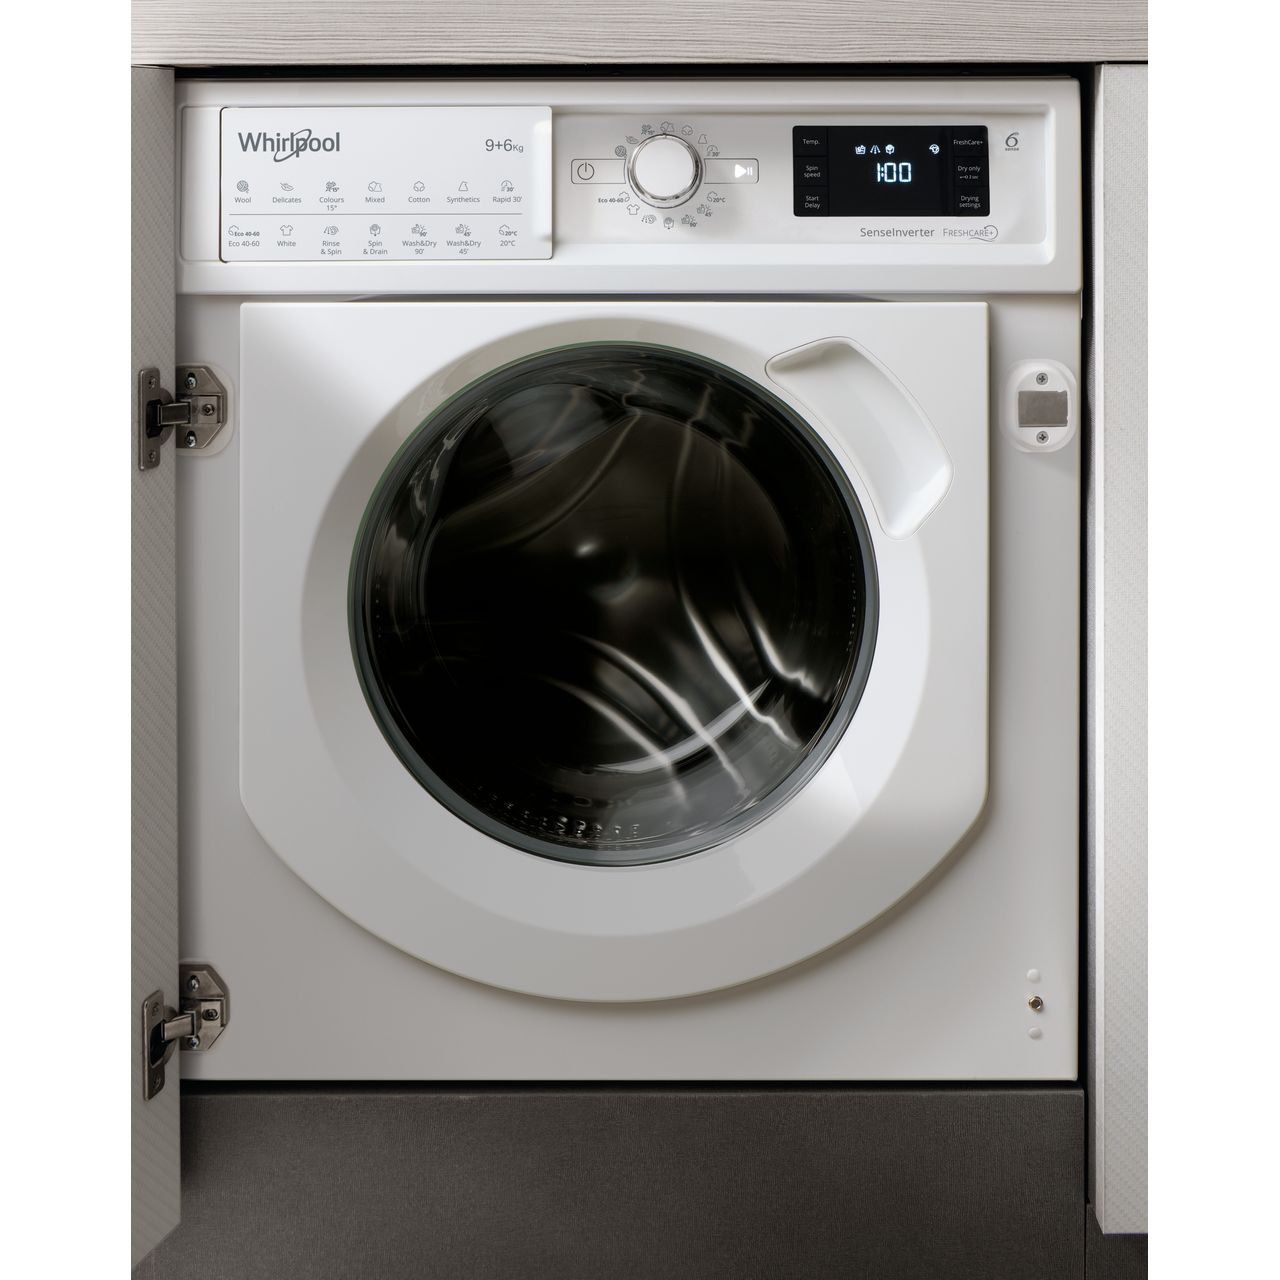 Whirlpool BIWDWG961484UK Integrated 9Kg / 6Kg Washer Dryer with 1400 rpm Review